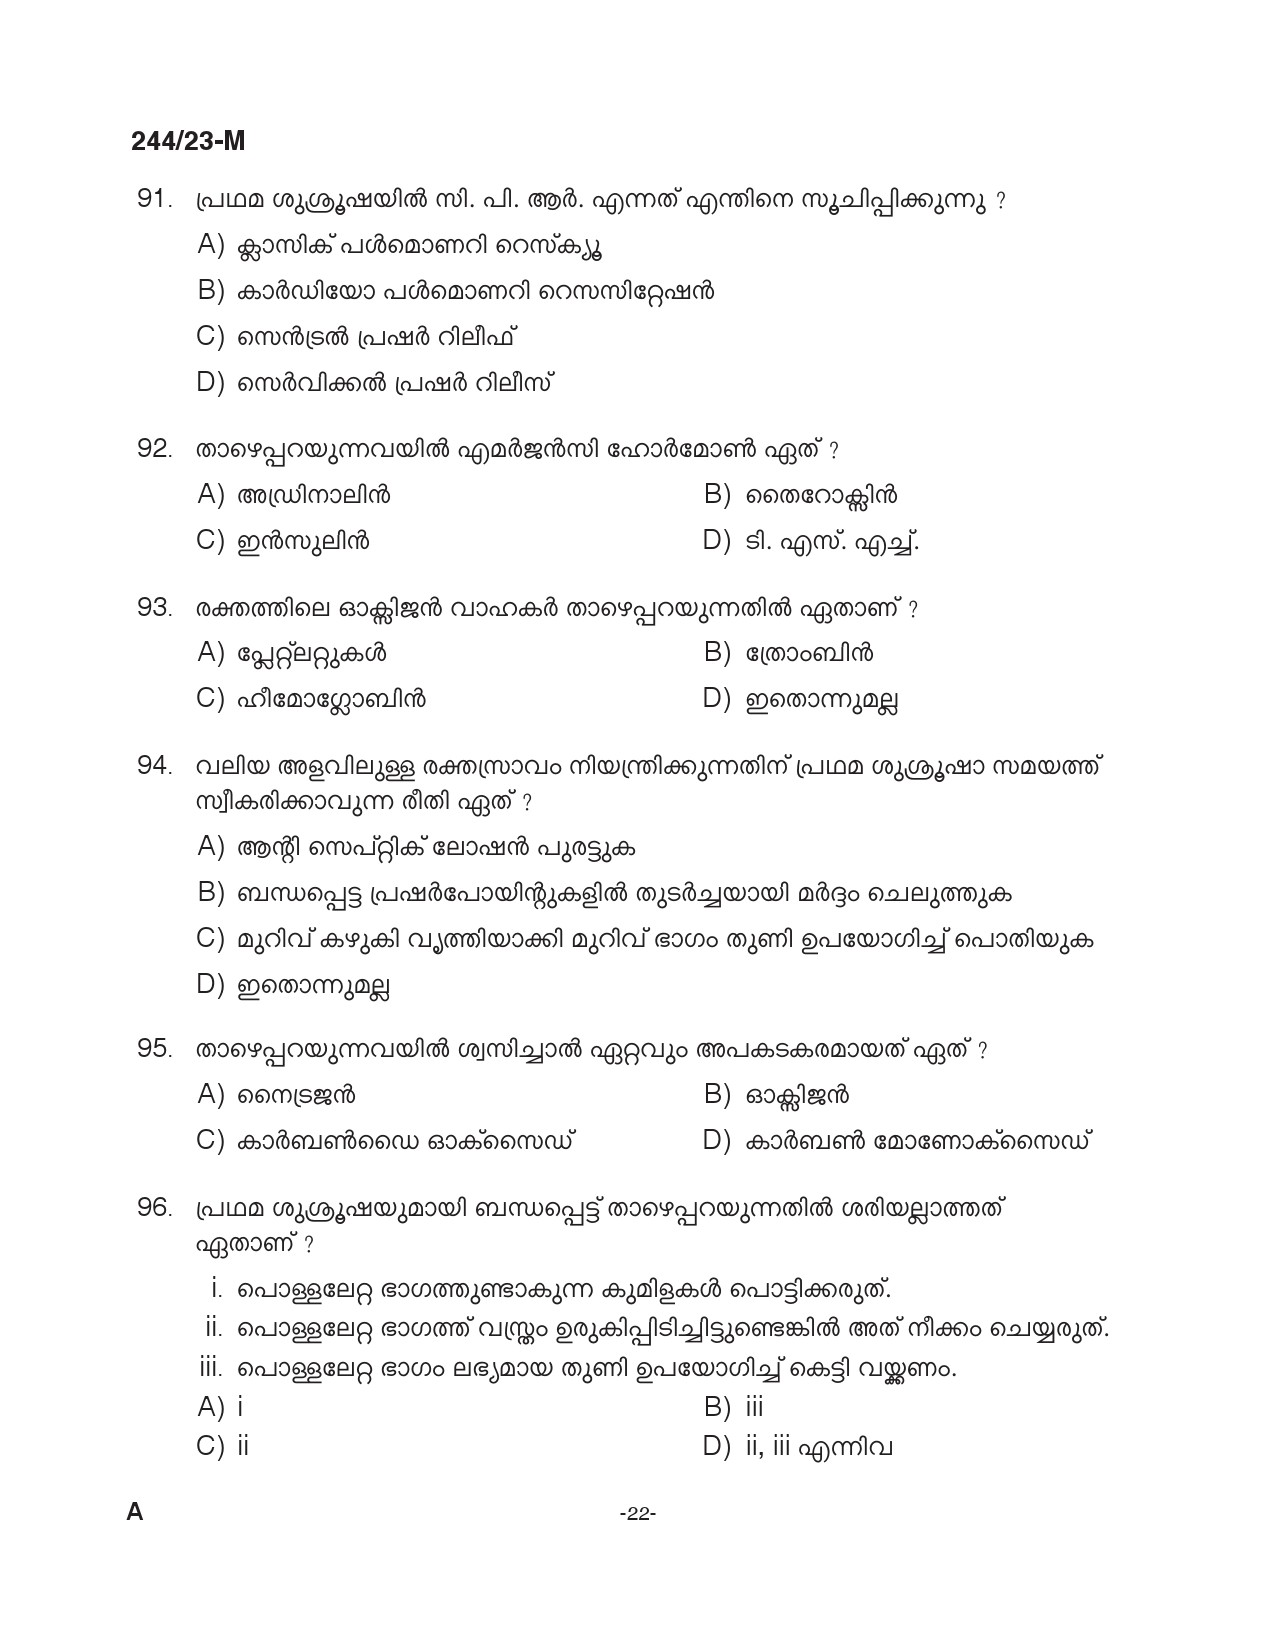 KPSC Fire and Rescue Officer Trainee Malayalam Exam 2023 Code 2442023 M 21